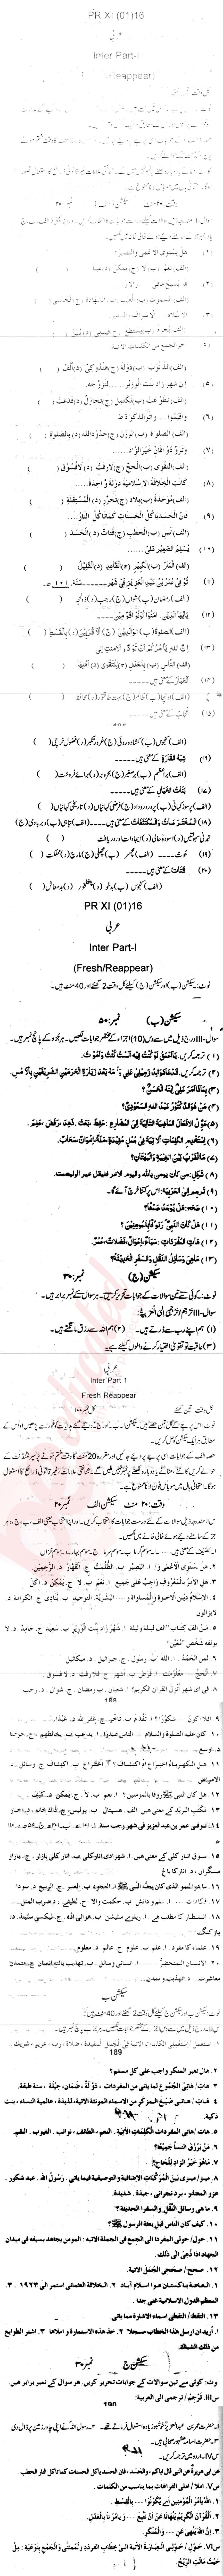 Arabic FA Part 1 Past Paper Group 1 BISE Abbottabad 2016